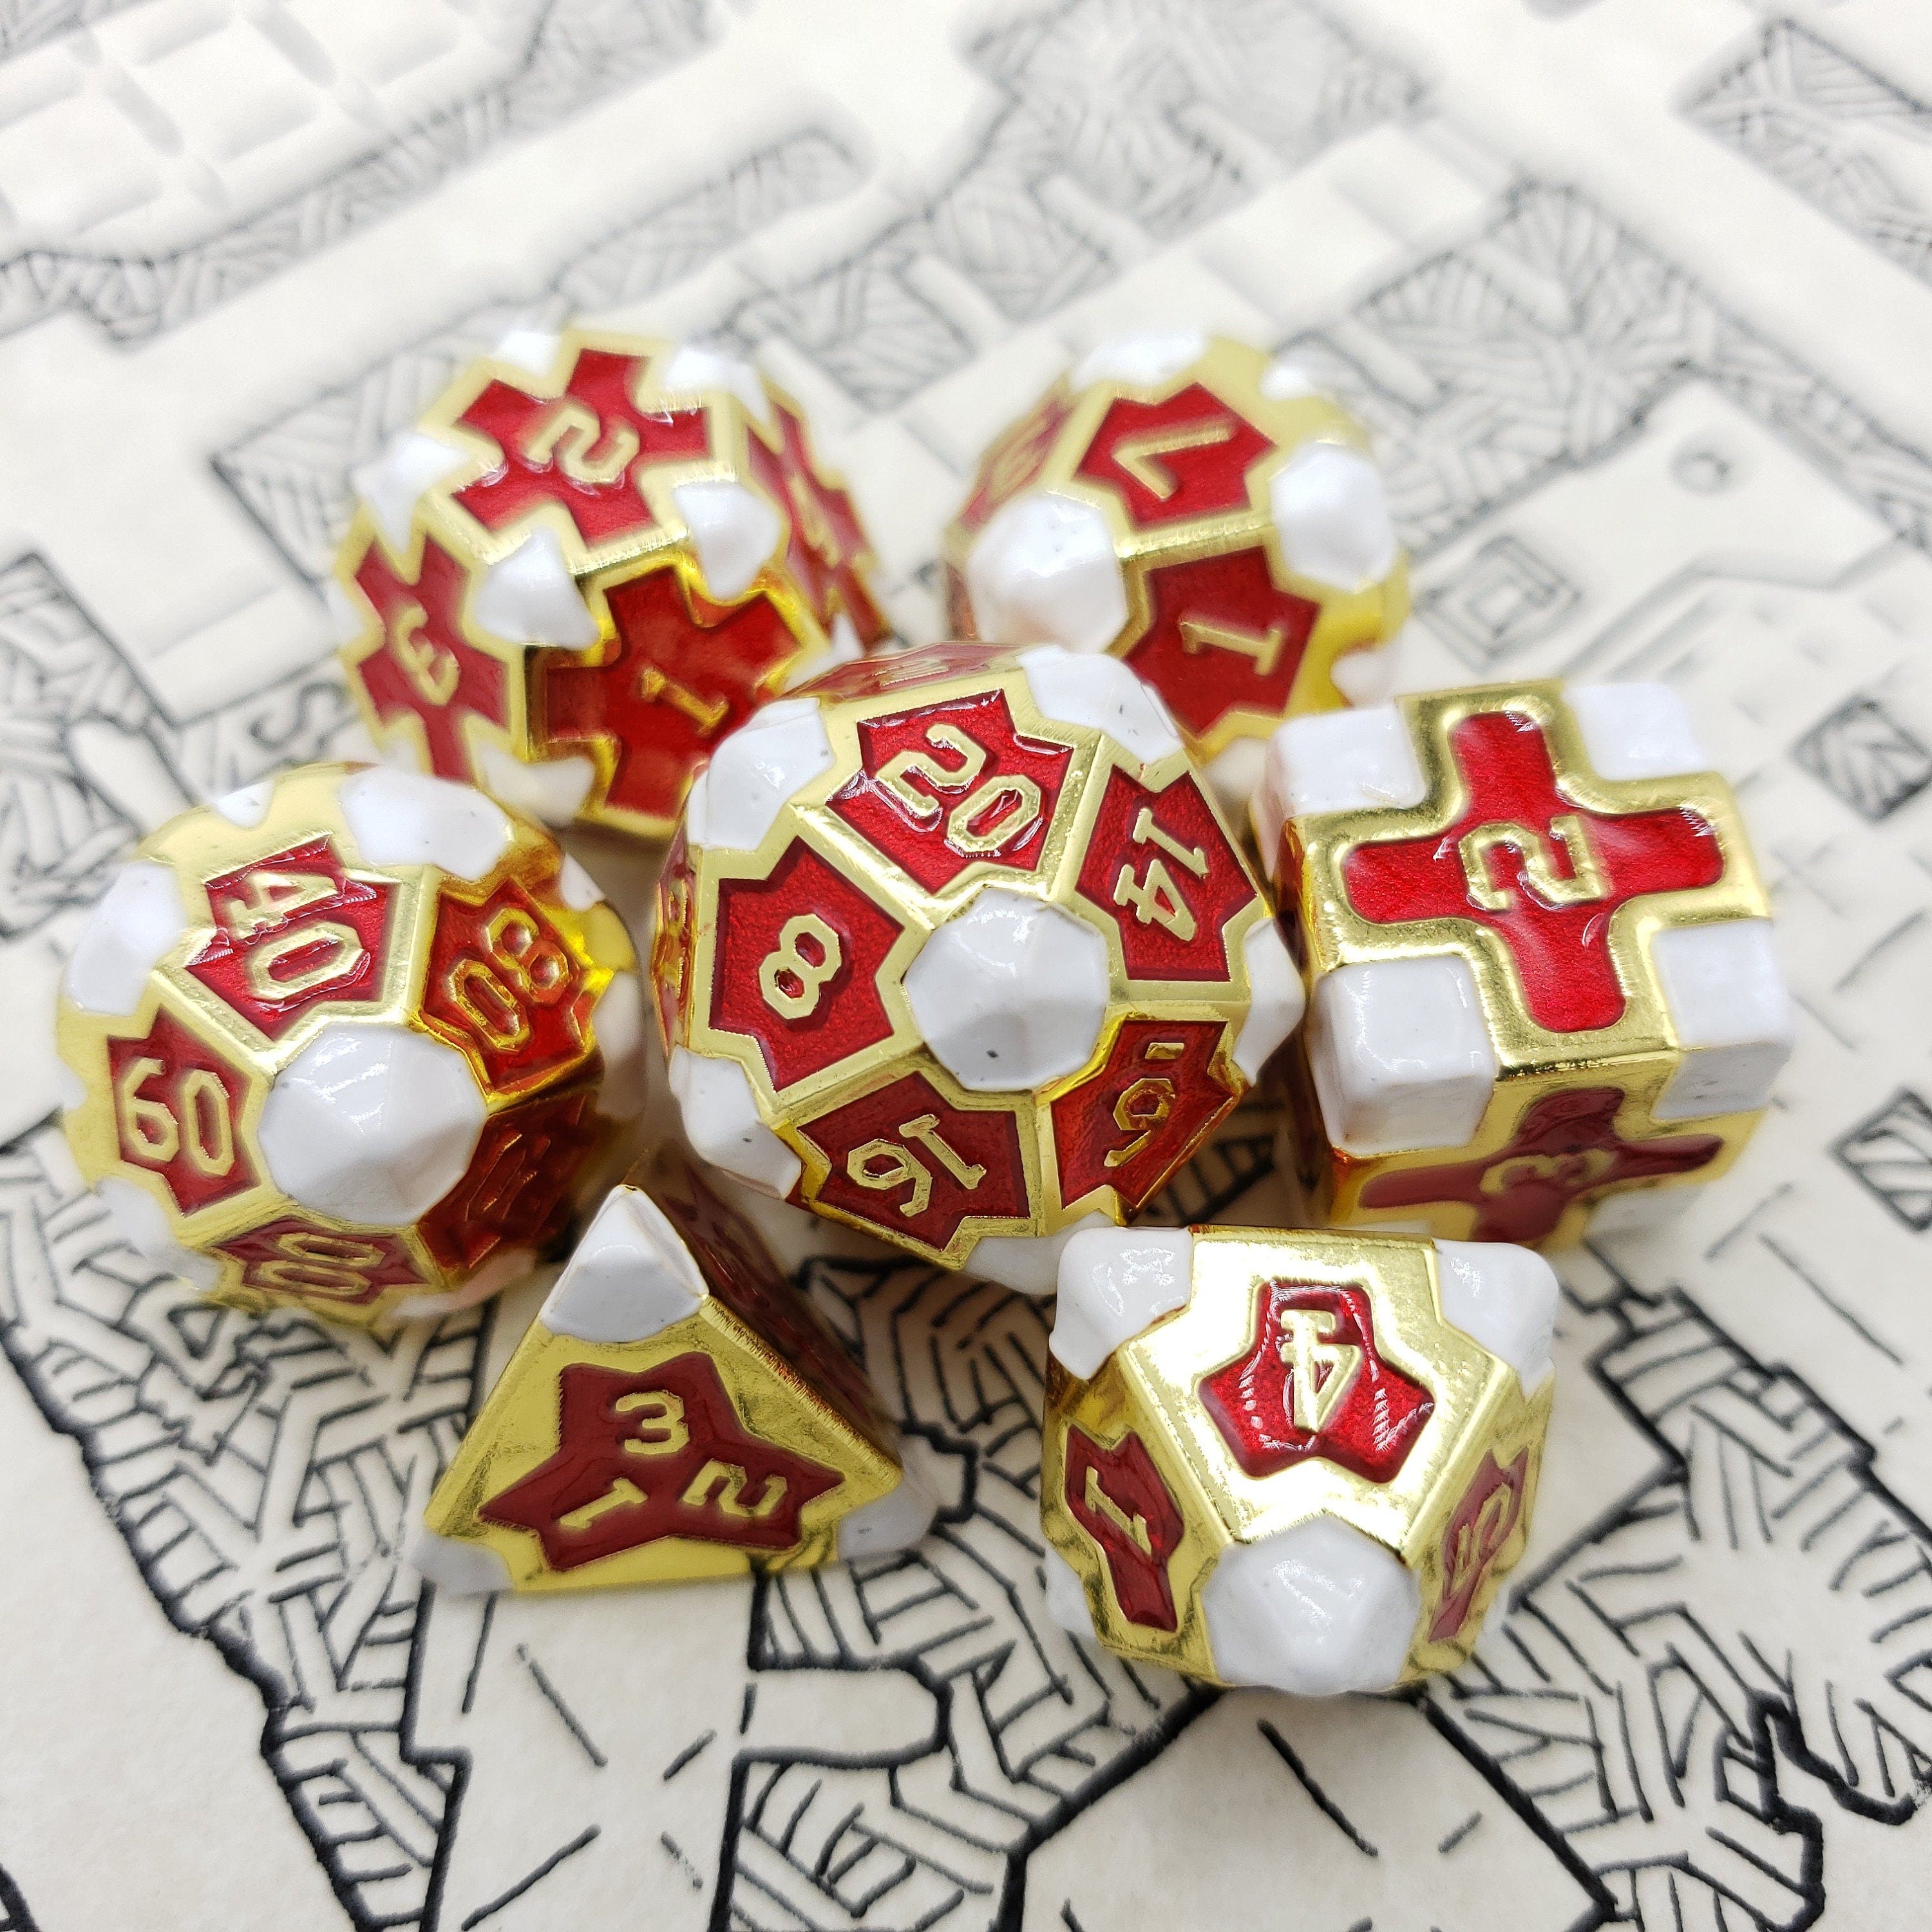 MEDIC METAL DICE DnD Dice Set - RPGDice Dungeons Dragons Dnd Dice Set- Stylish Gold Red & White Metal Dice Set -Polyhedral Dice Set